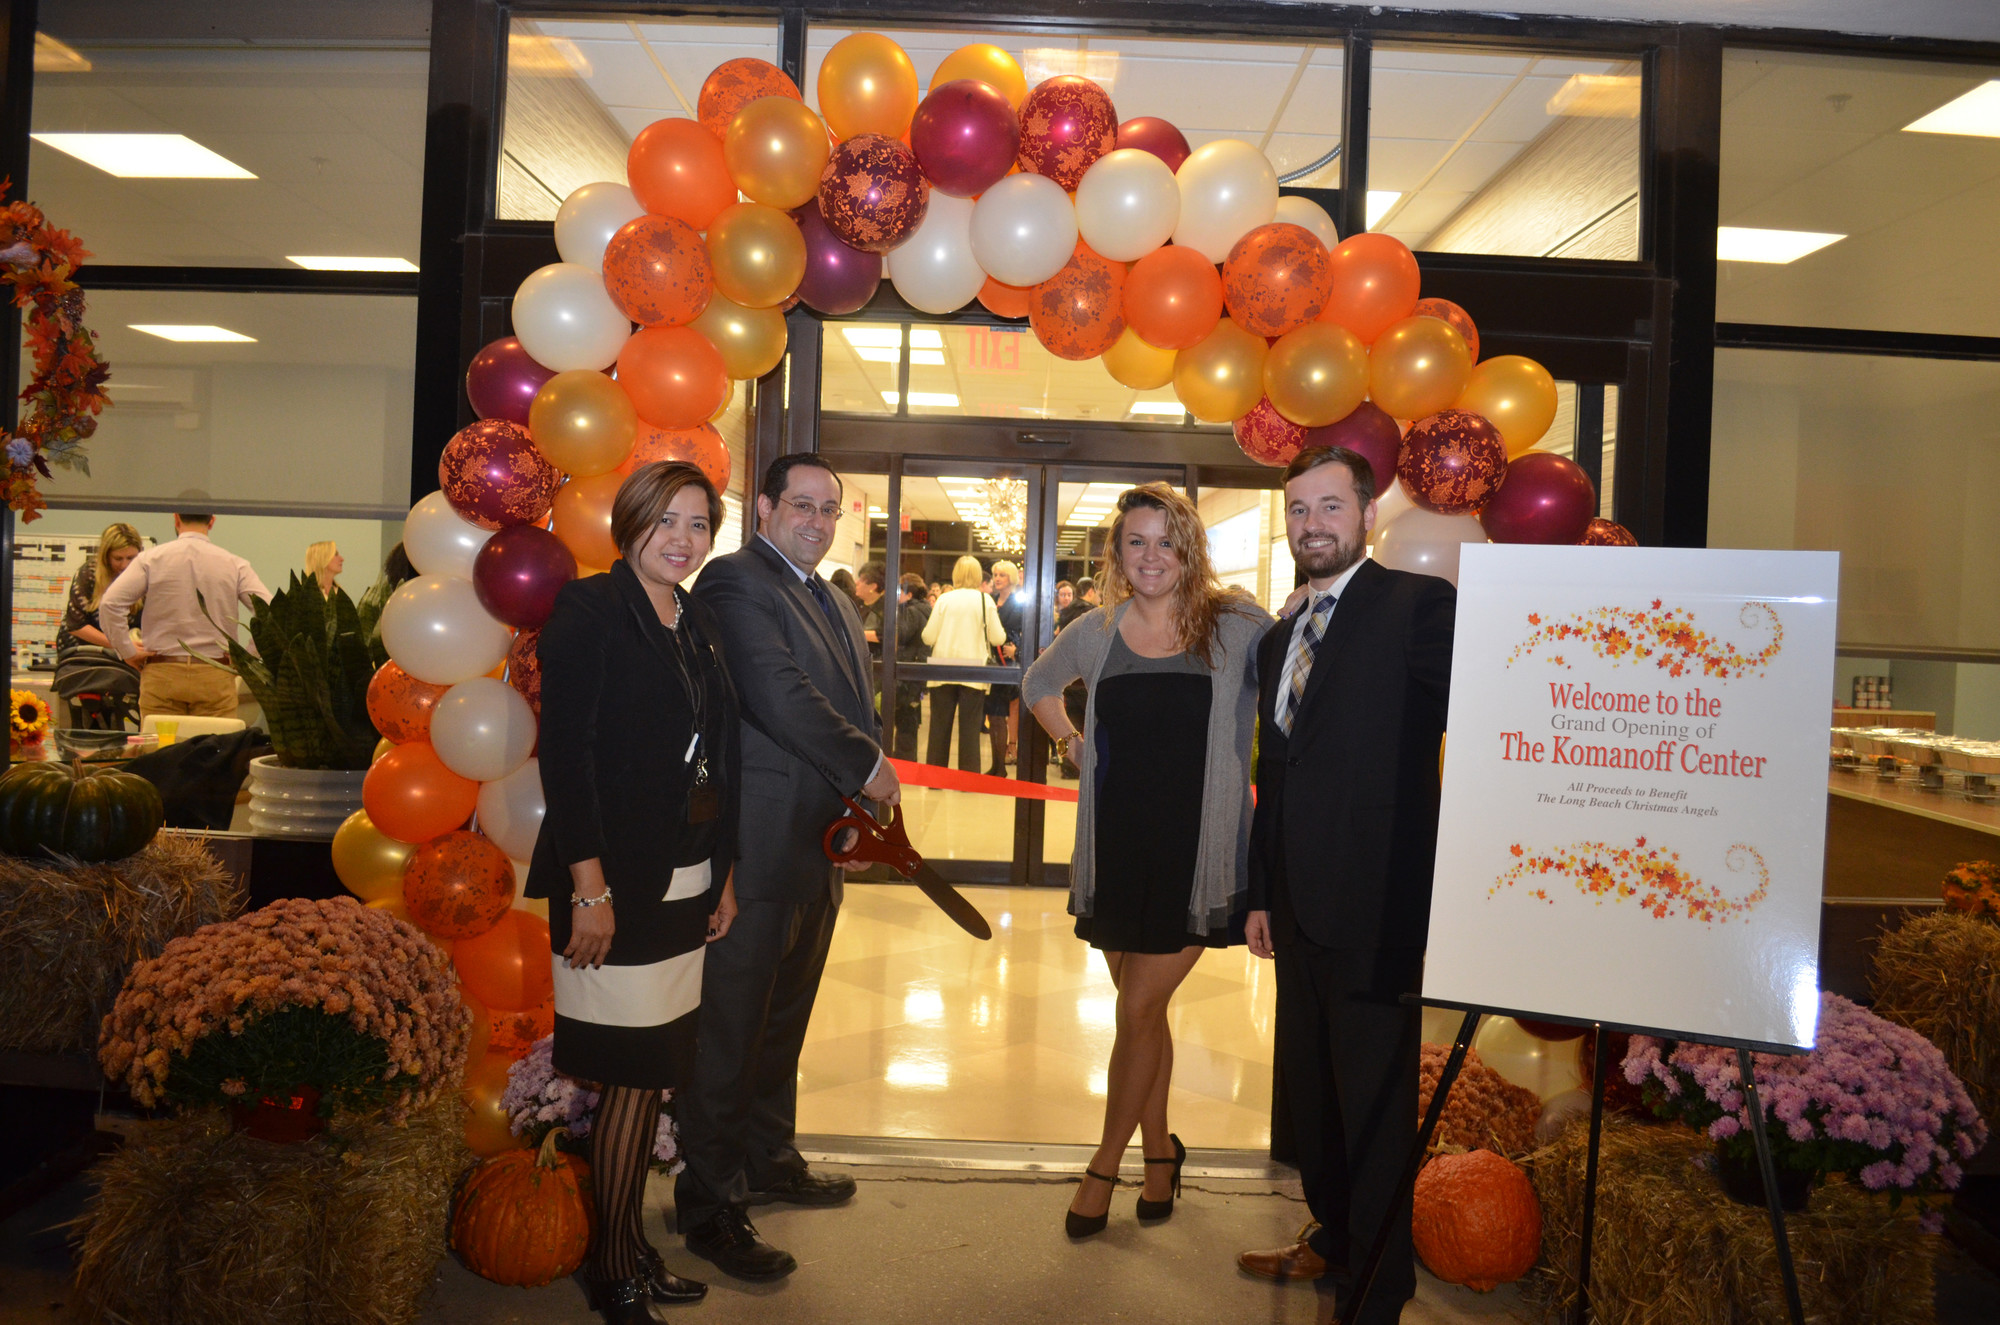 Tim Baker/HeraldIsabel Agustin, far left, David Goldman, Katie Powers and Joe Carillo outside of the newly renovated Komanoff Center for Geriatric and Rehabilitative Medicine on Nov. 18. The center reopened its rehabilitation facilities that were damaged by Hurricane Sandy.